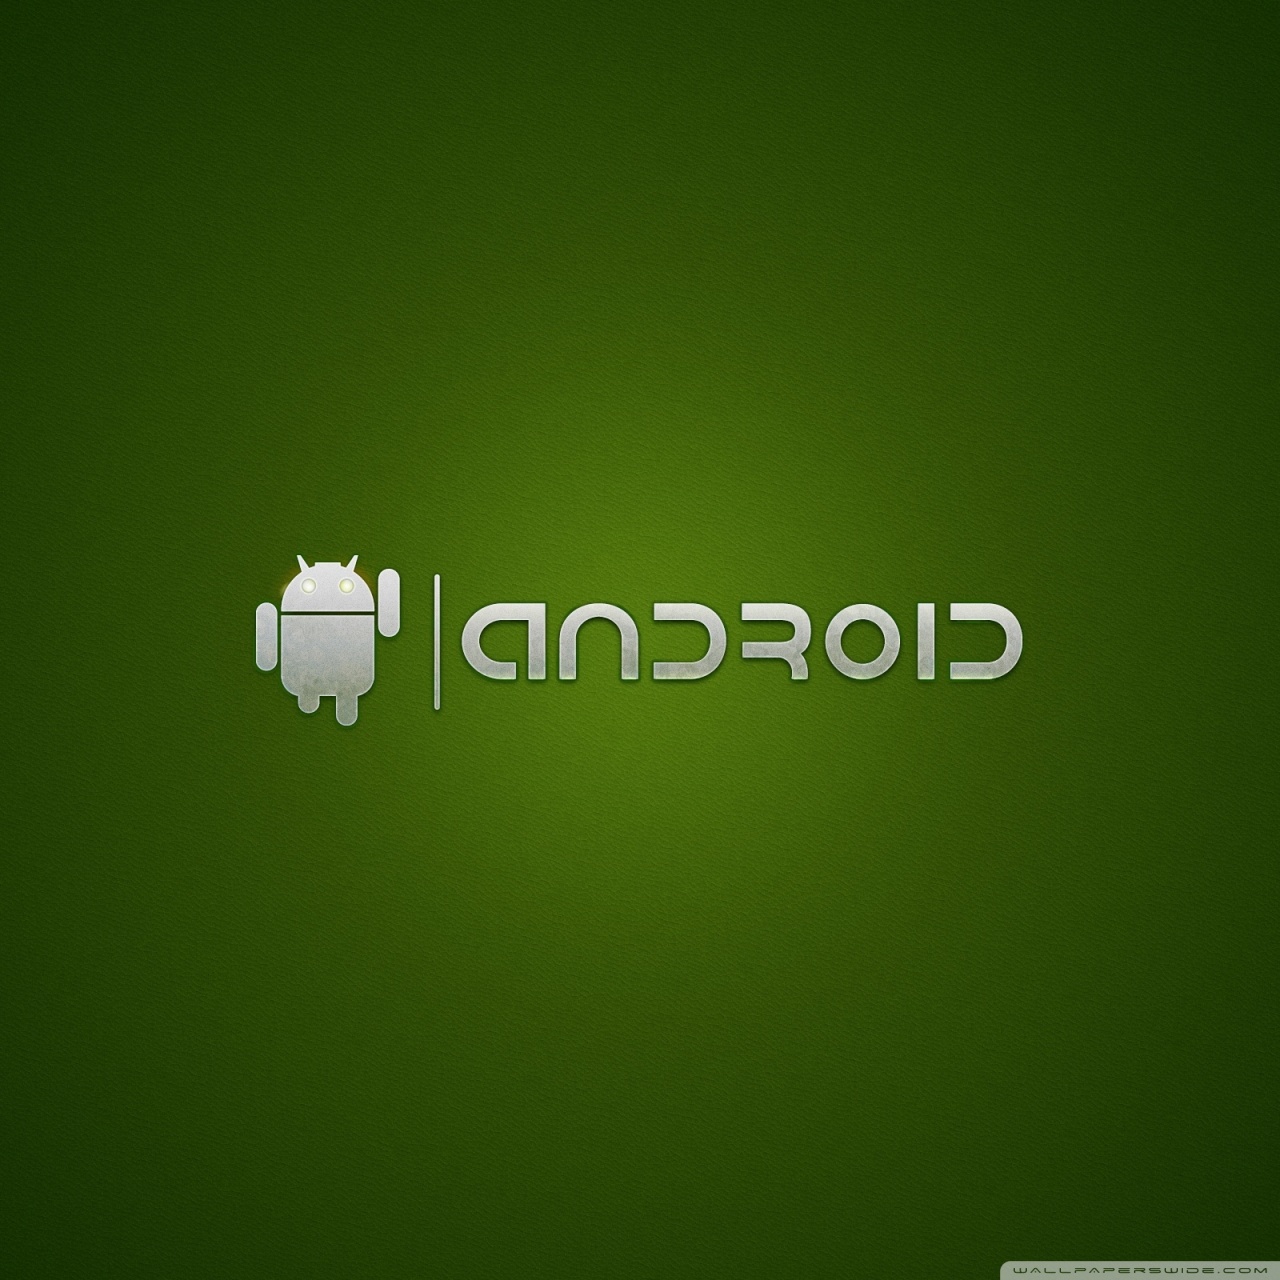 Android 3d Wallpaper Background